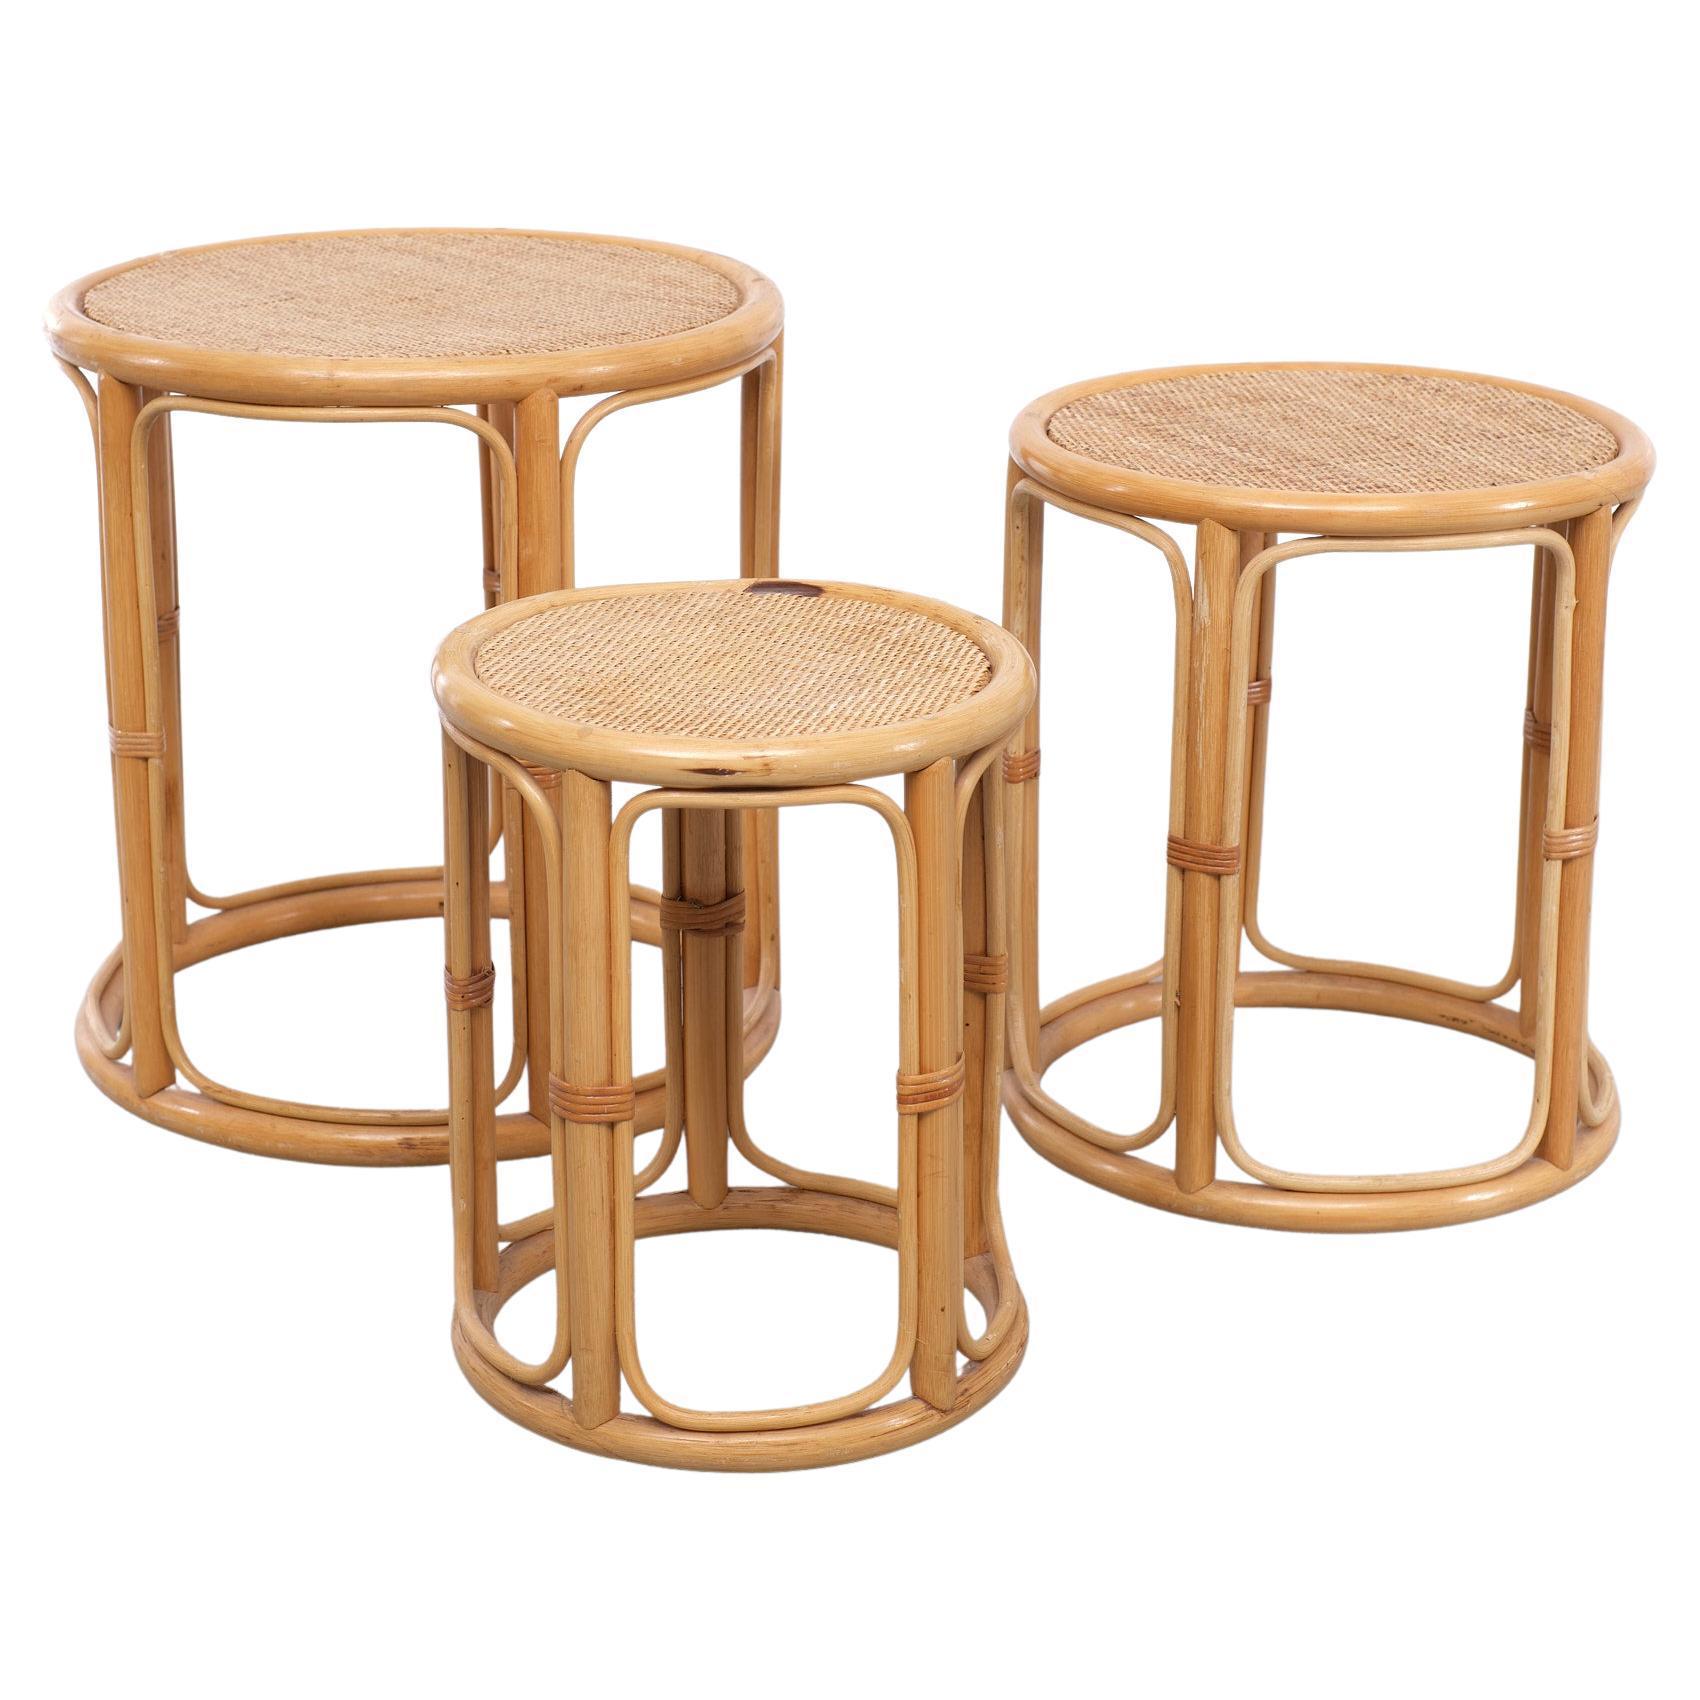 Very nice set of three tables. Natural Wicker. Round shaped.